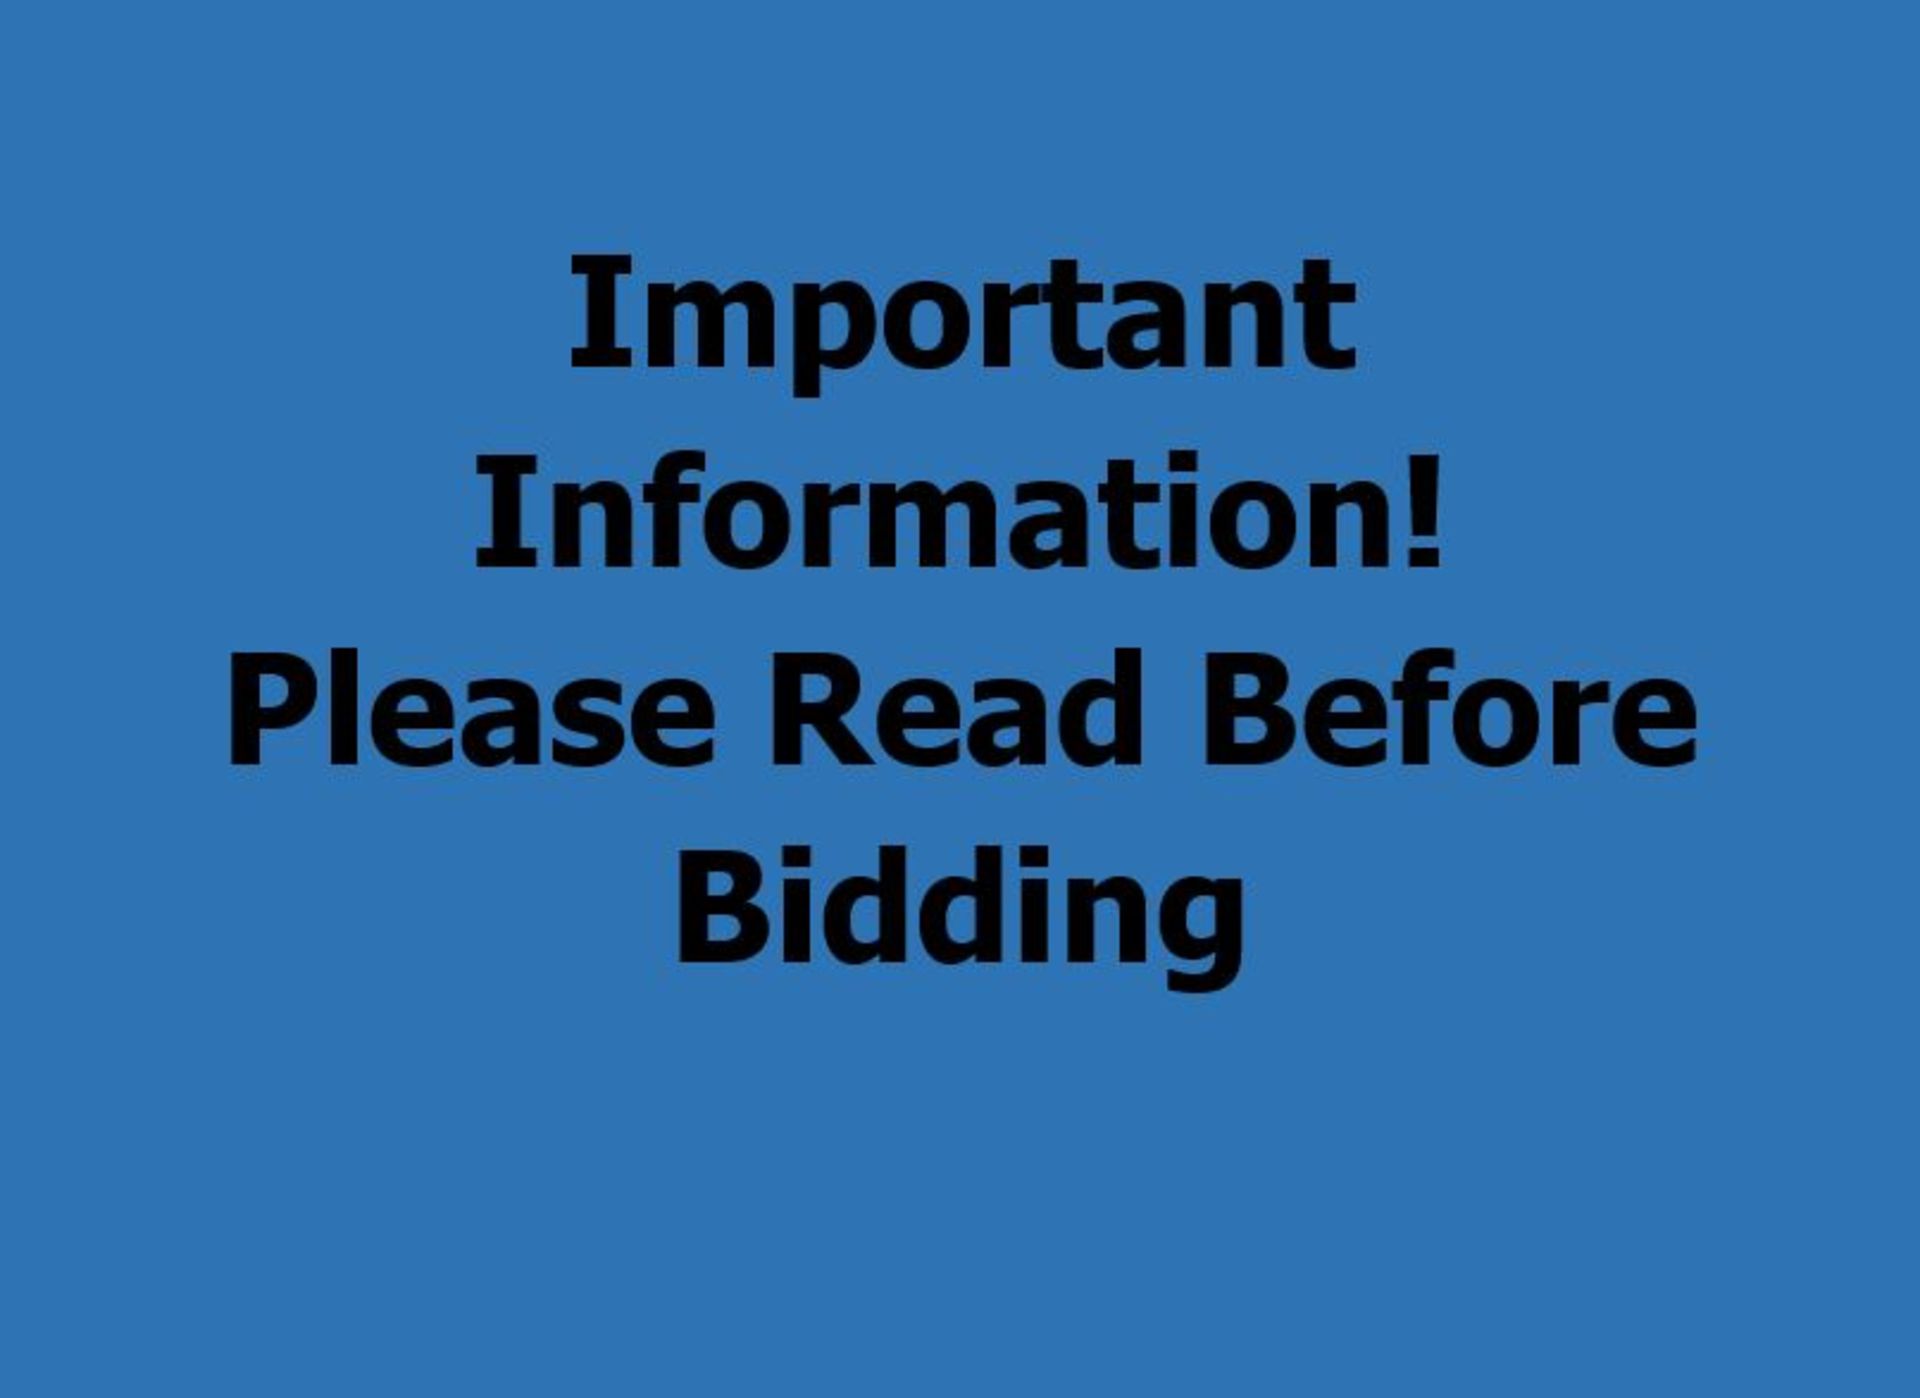 Important Information! Please Read Before Bidding